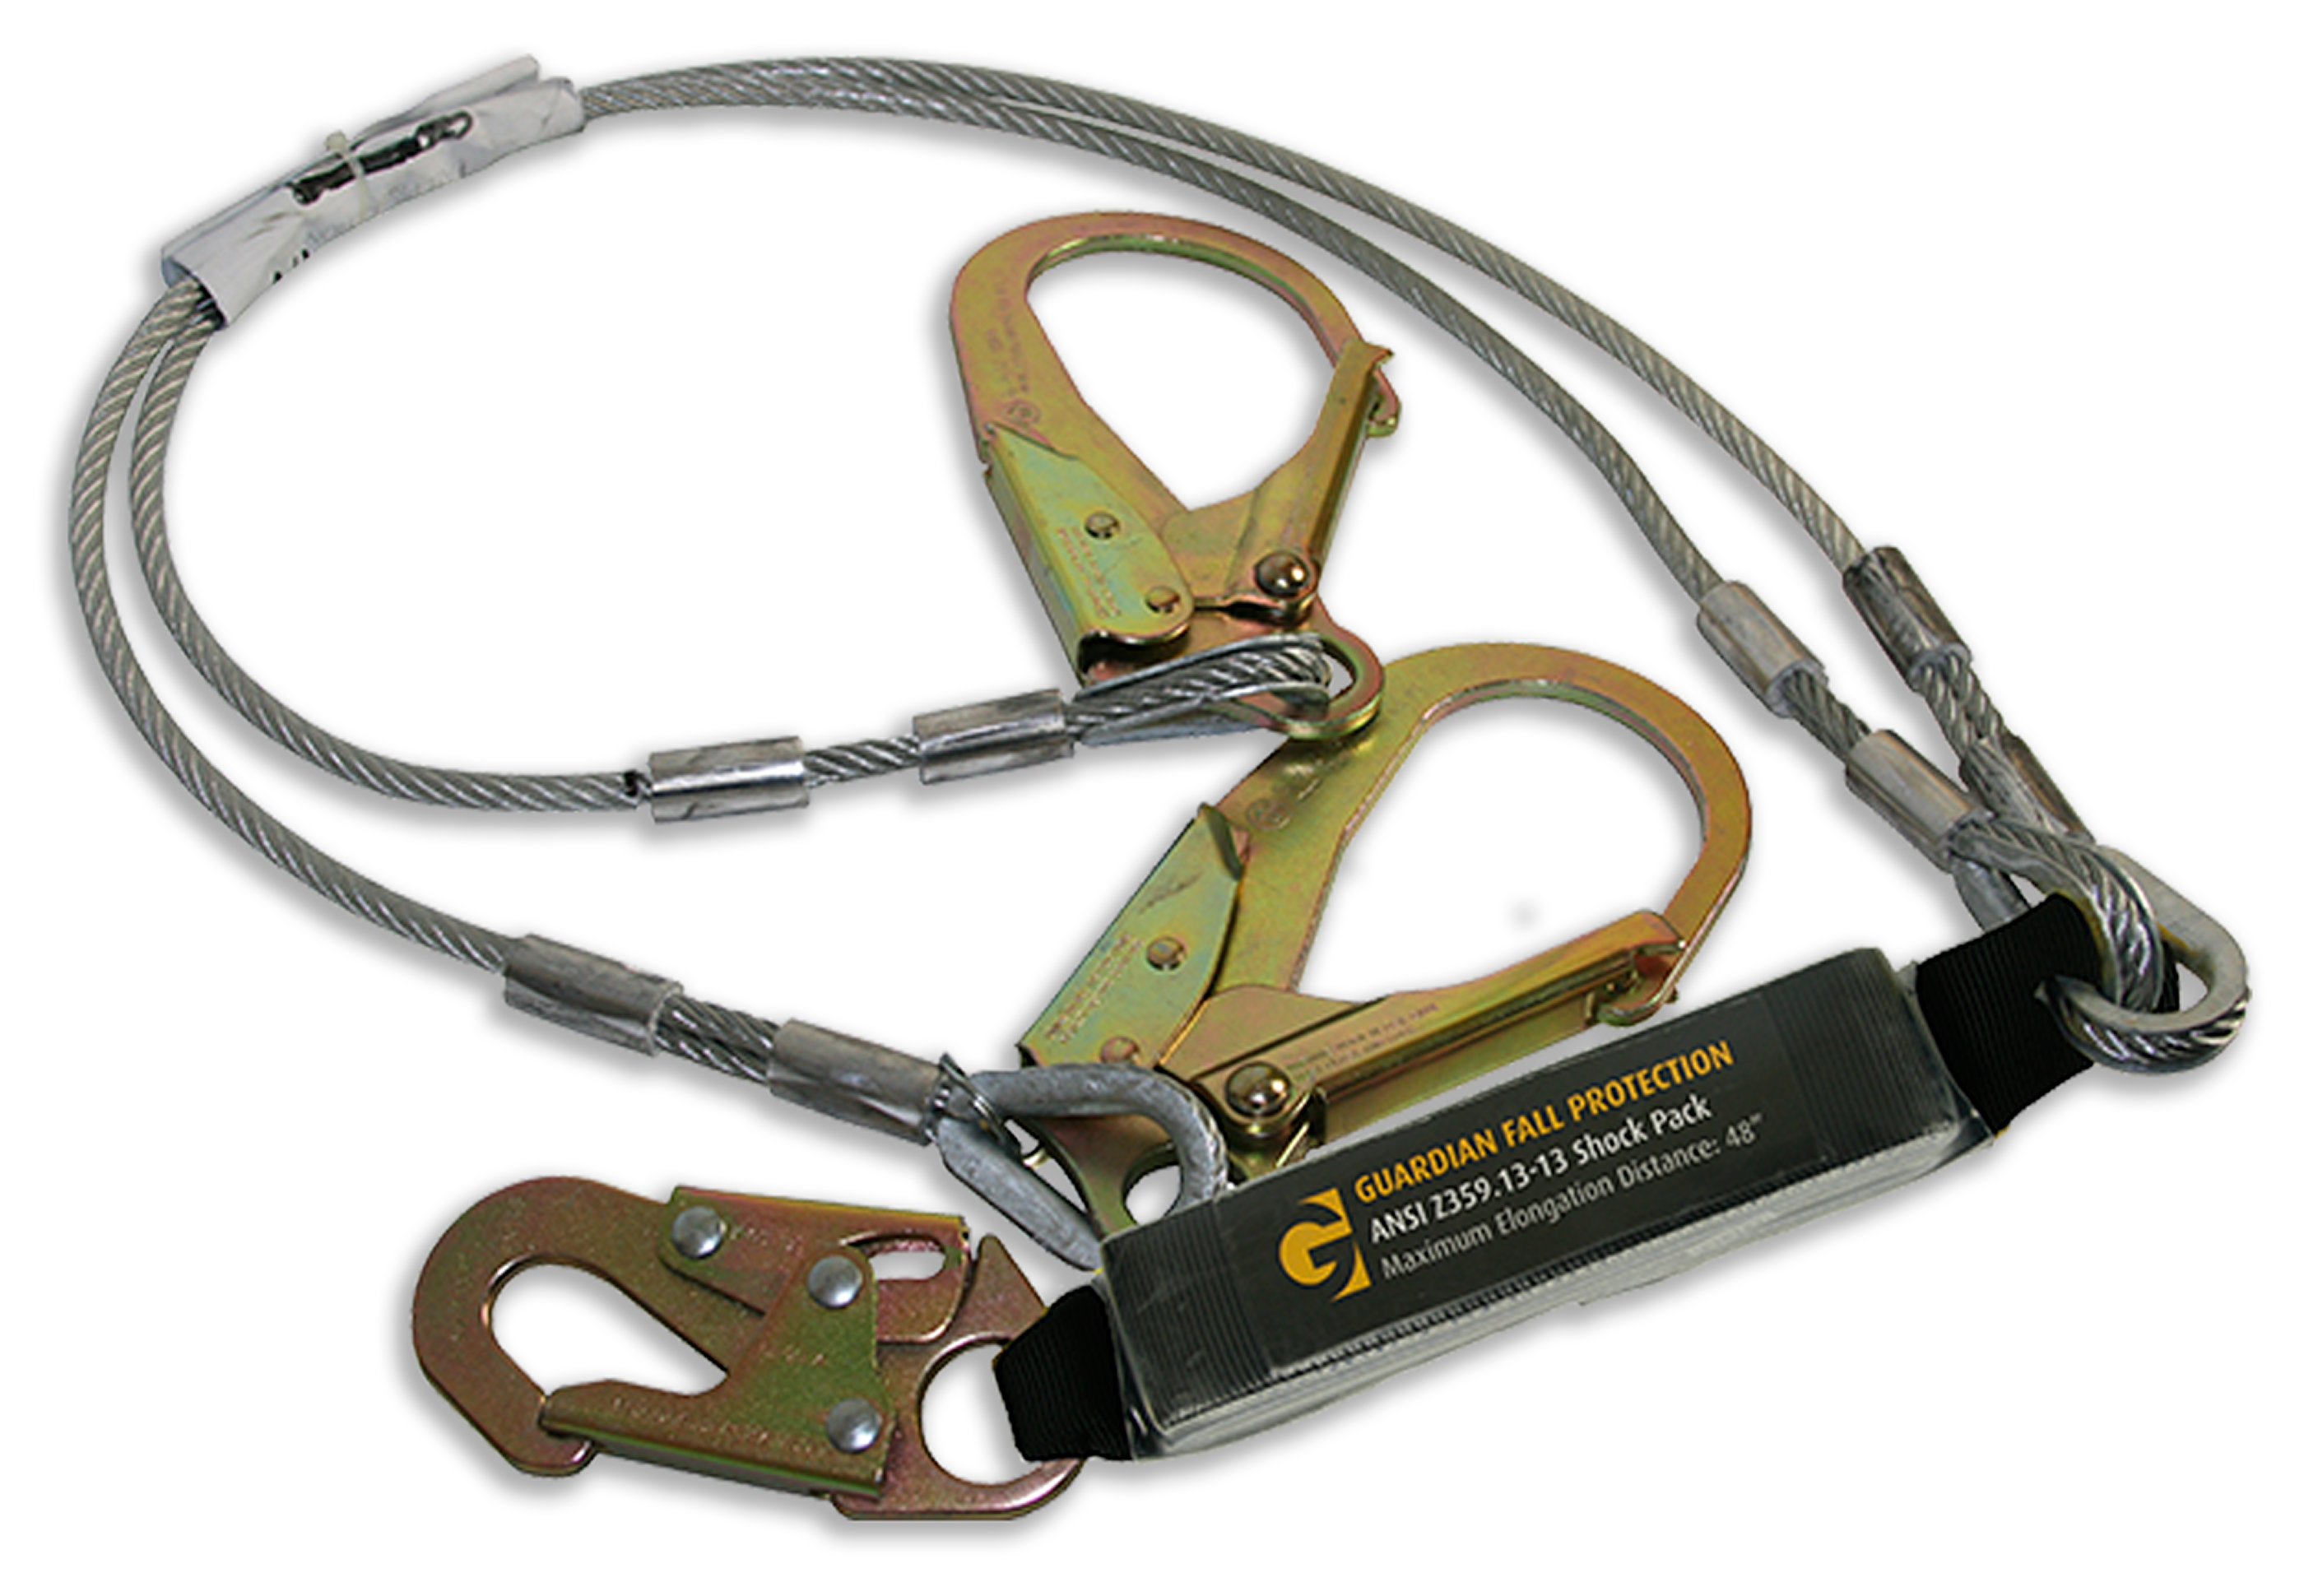 https://www.engineeredfallprotection.com/store/images/thumbs/0000153_guardian-cable-lanyard-6-ft-double-leg-w-rebar-hooks-shock-absorber-01243.png